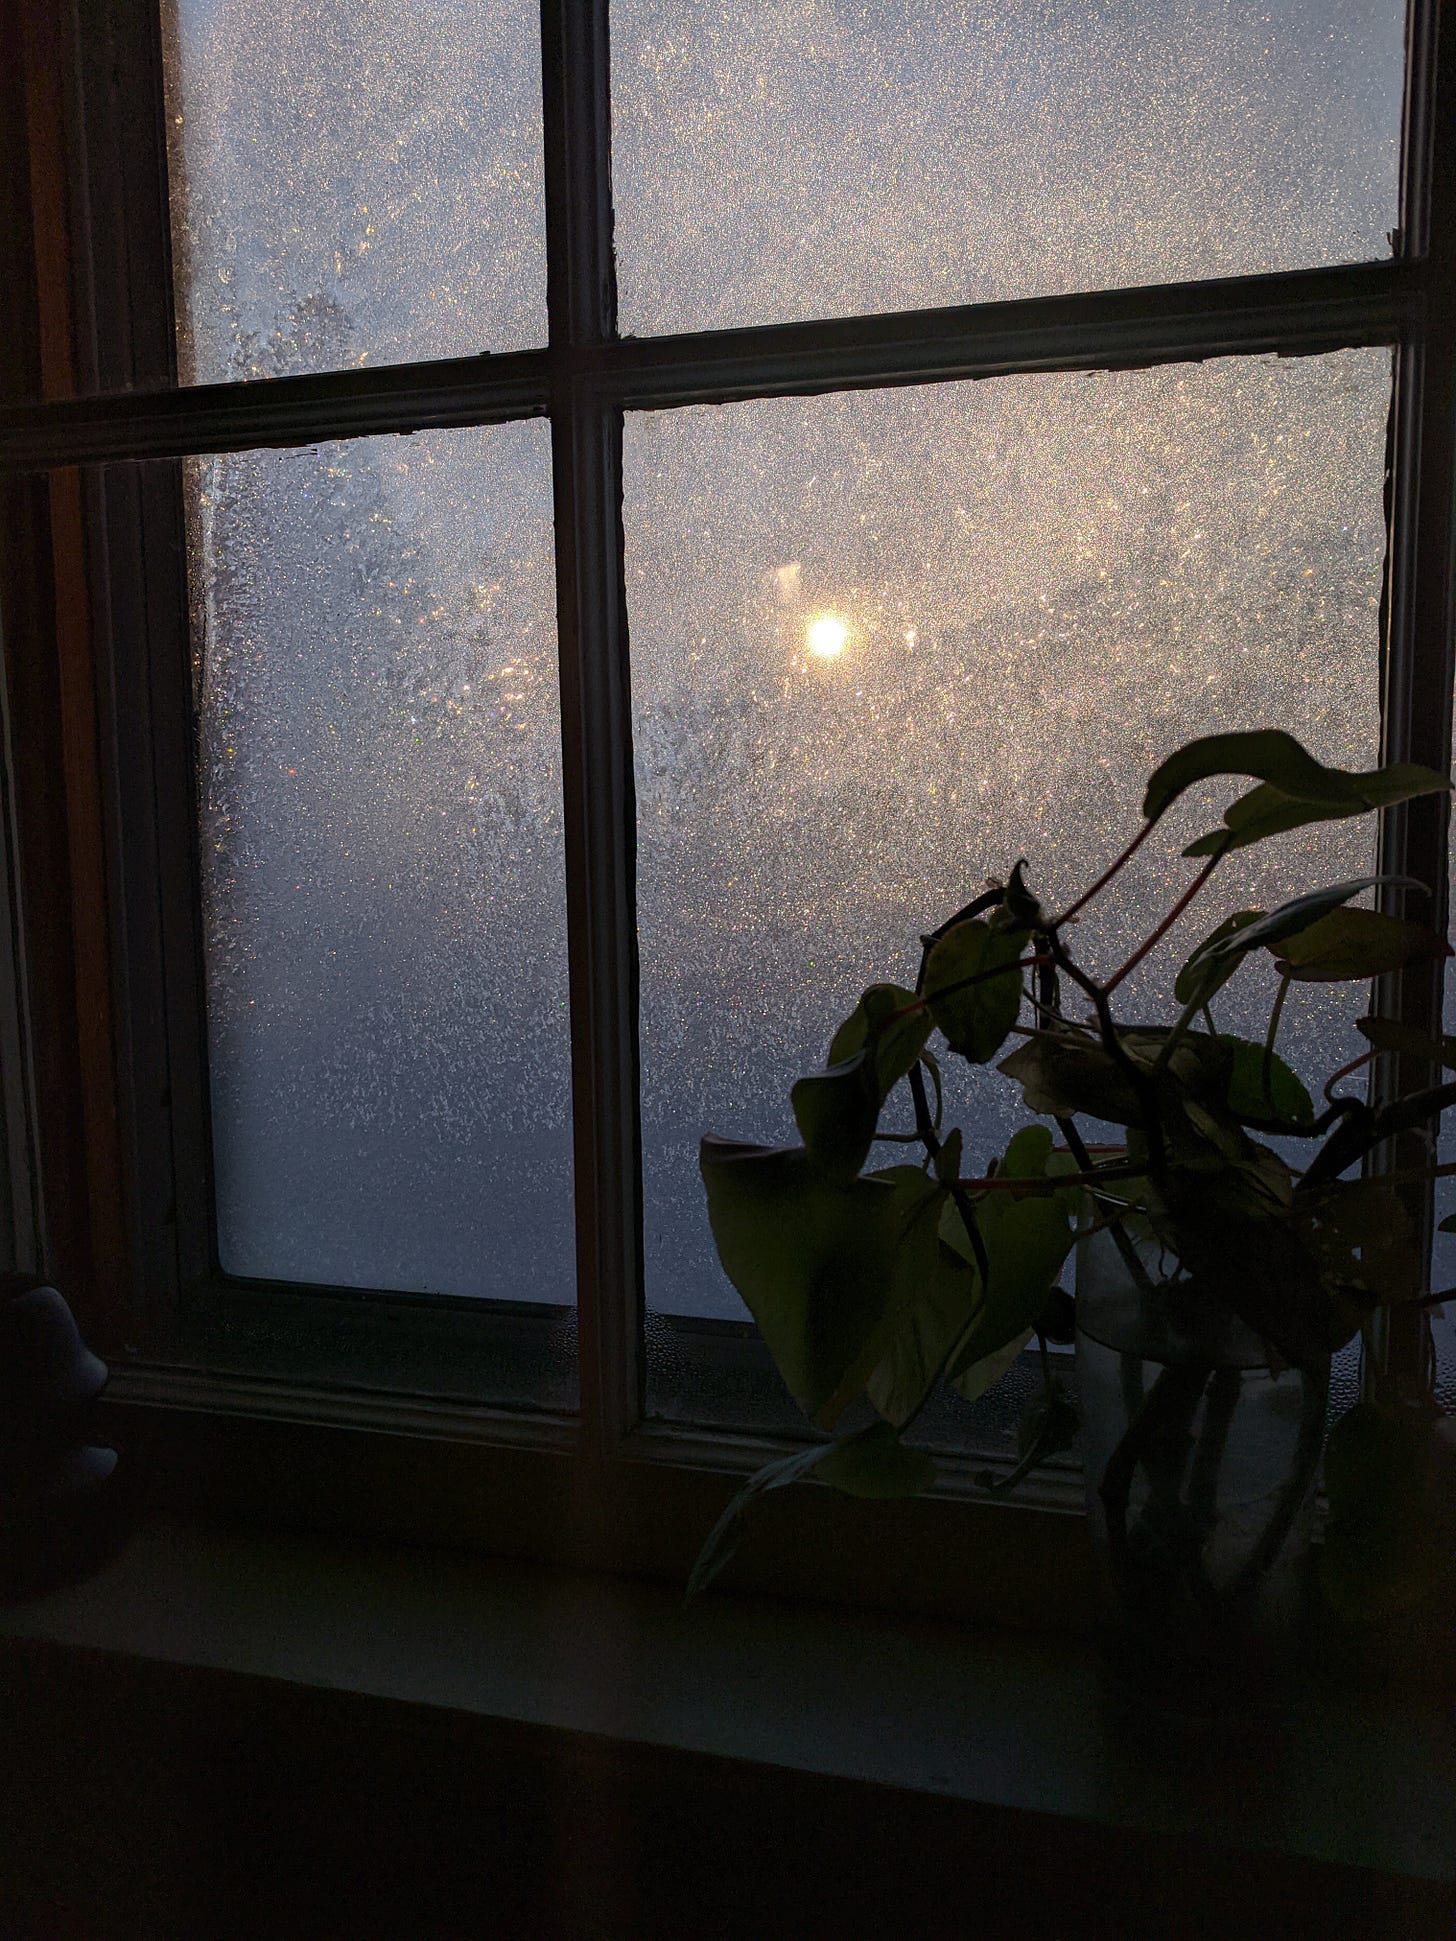 A screen window clogged with frost. The sun is shining through it.